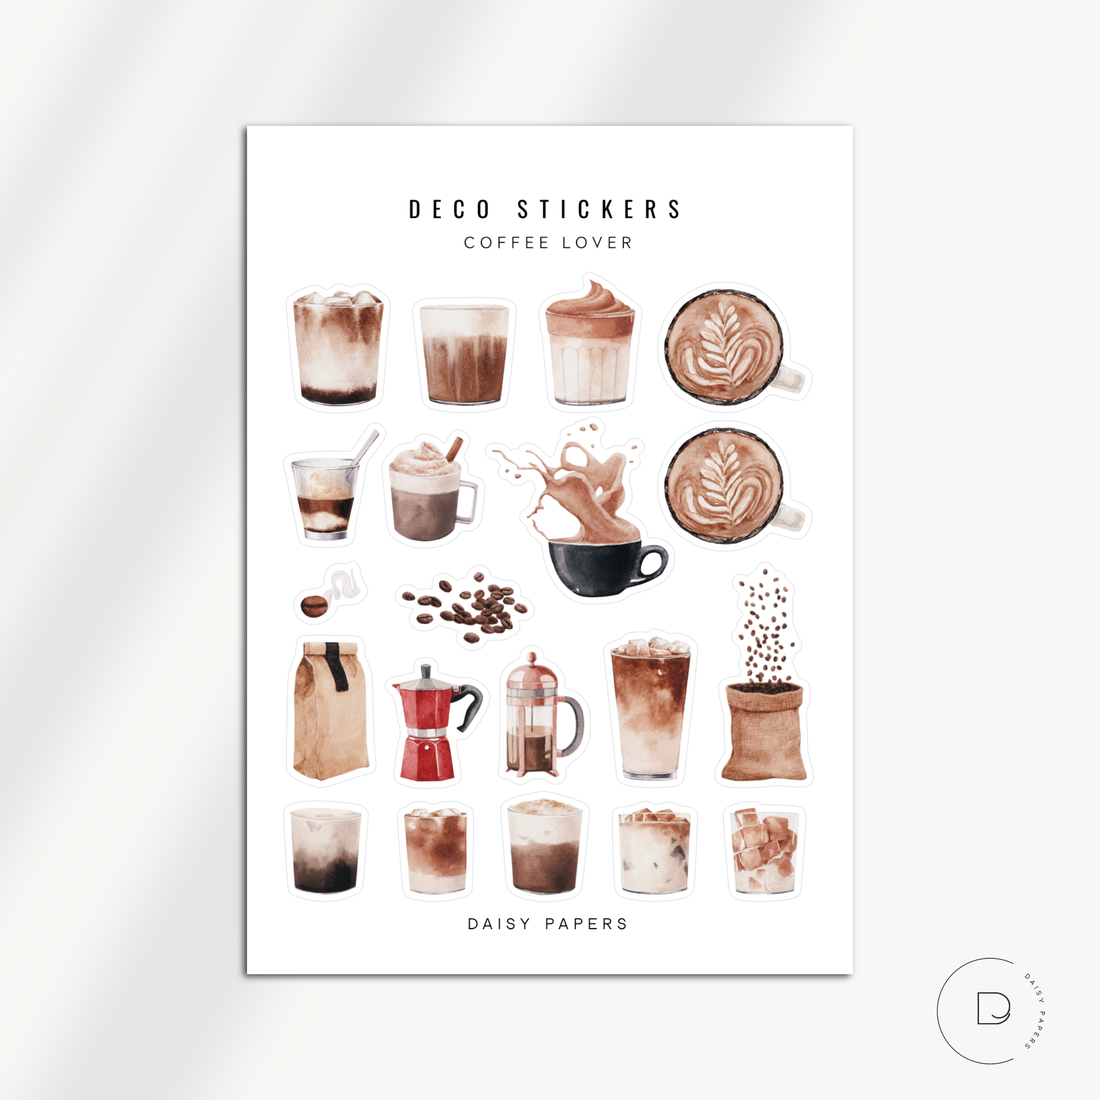 DECO STICKERS - COFFEE LOVER